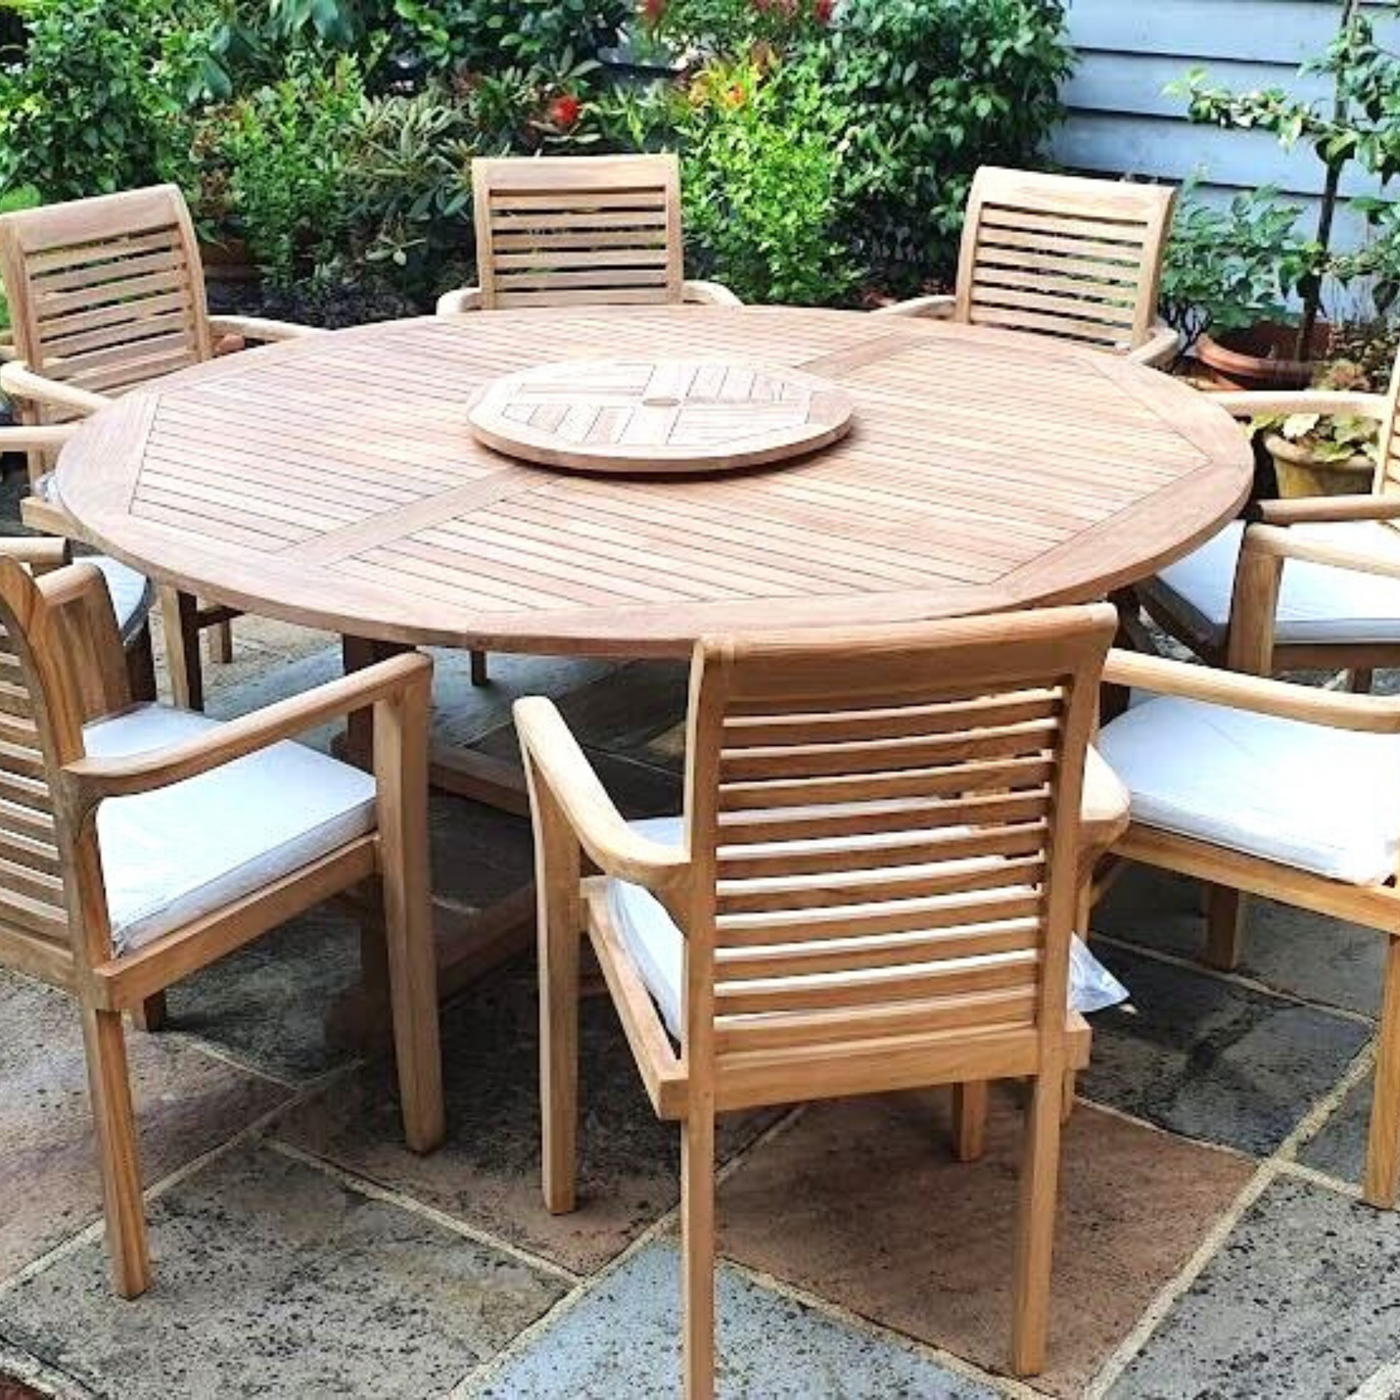 Teak 180cm Maximus Round Stacking Set (8 Oxford Stacking Chairs) Complete set Cushions included comprising a round table and six chairs with white cushions, surrounded by potted plants.